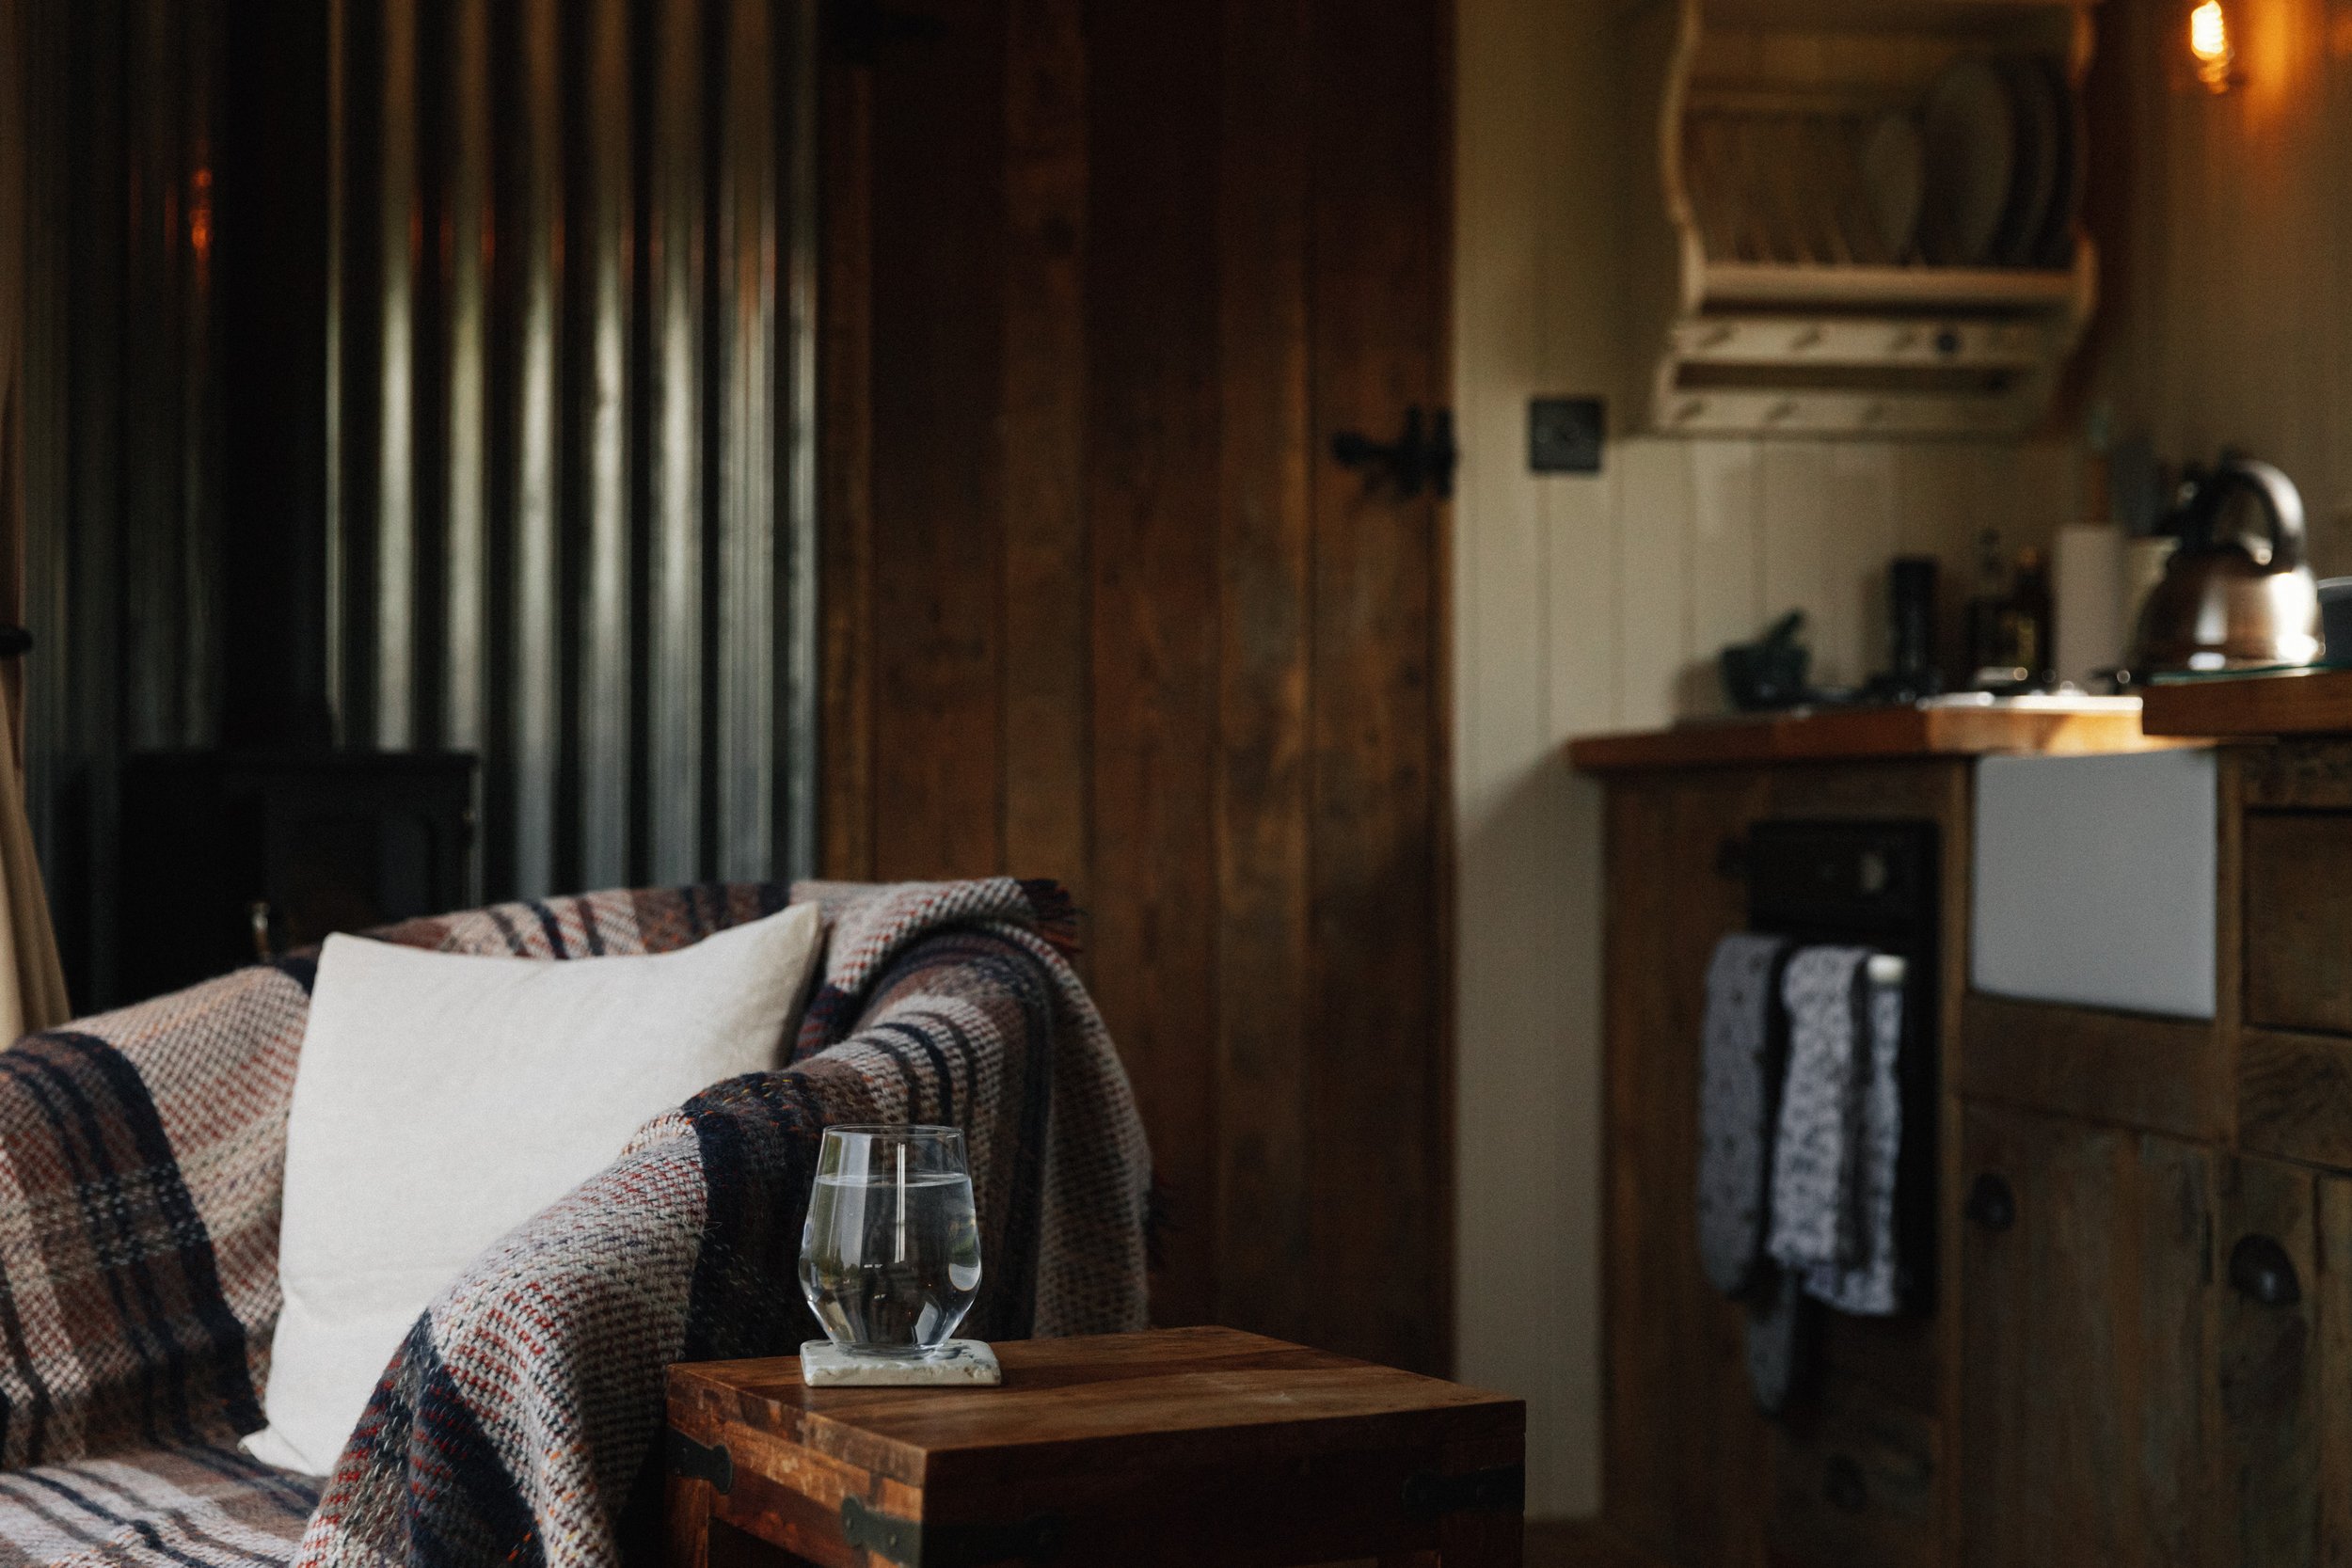 A cosy wooden cabin interior with armchair